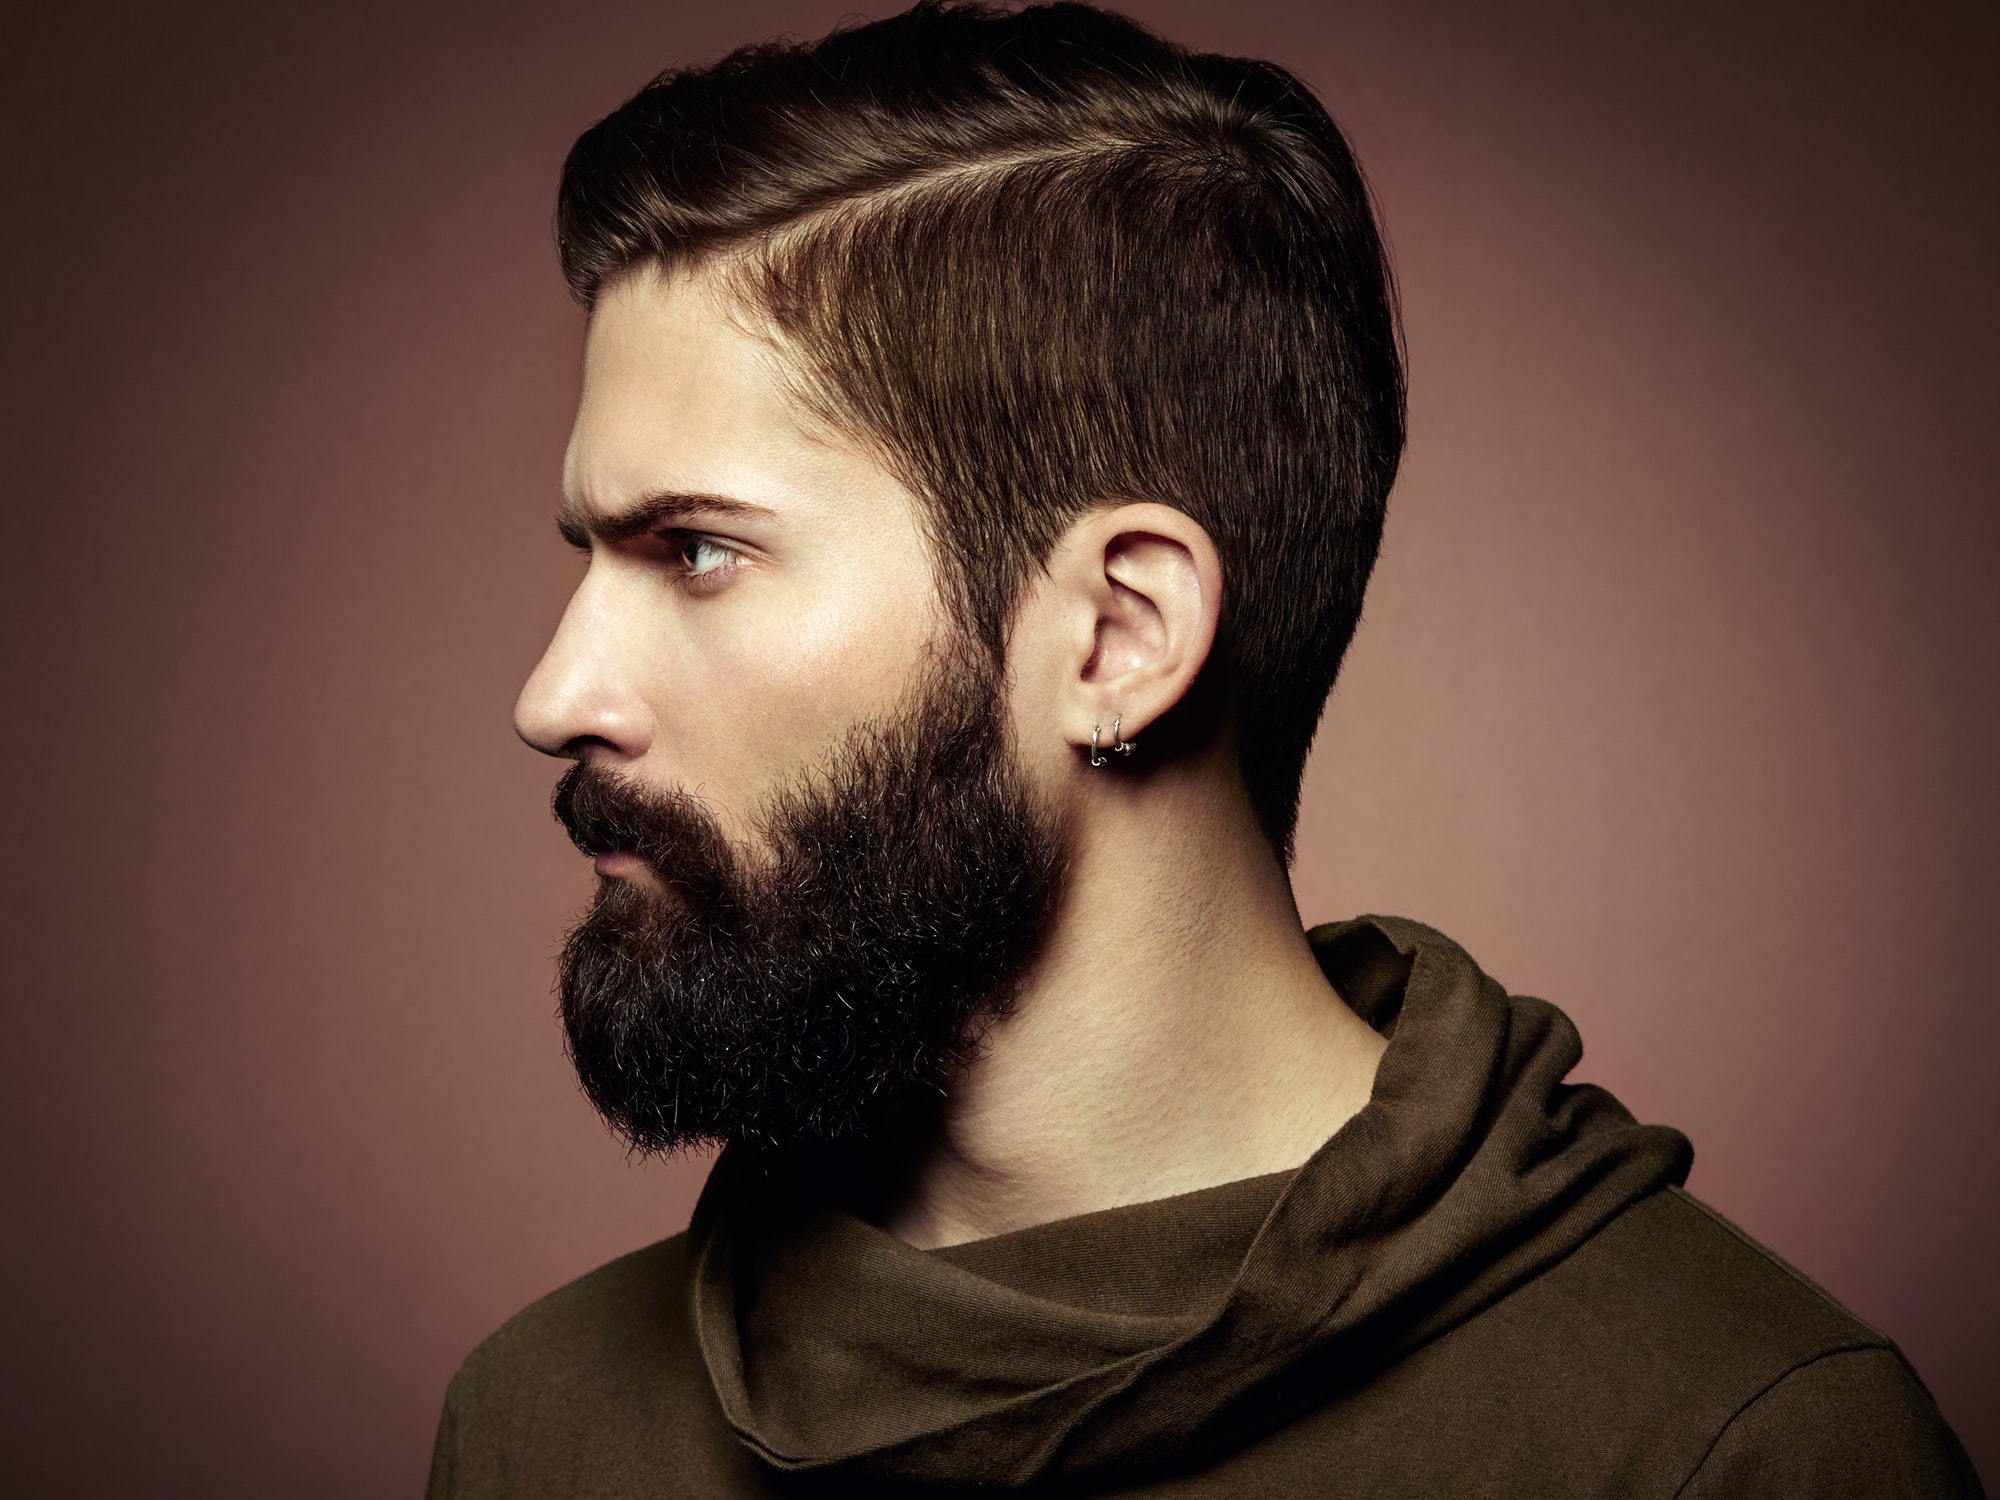 Portrait of handsome man with beard